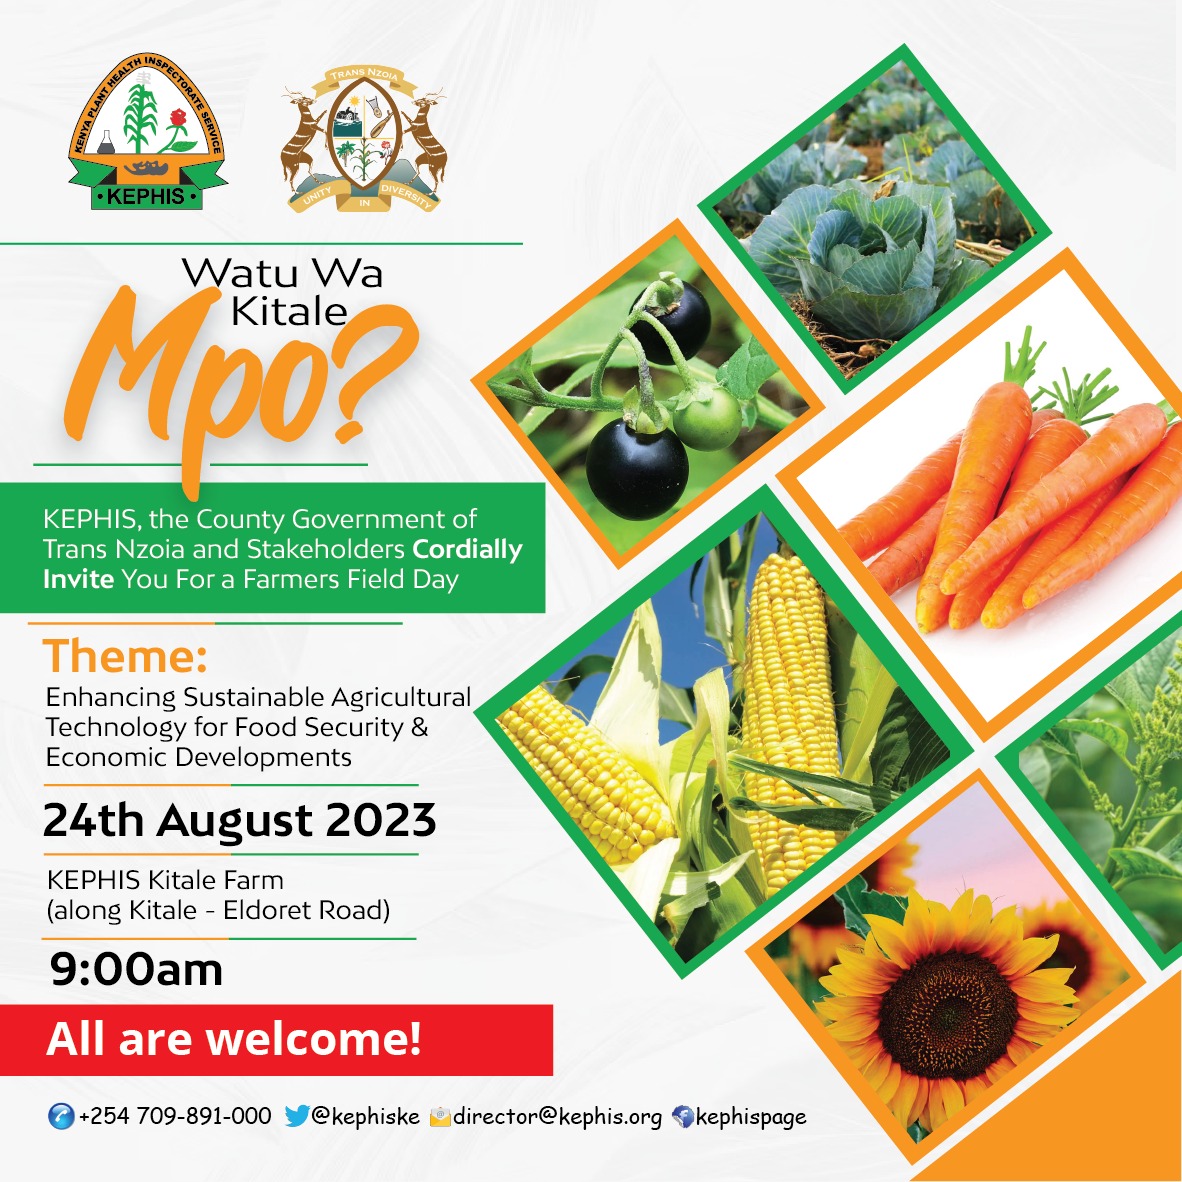 Welcome all today for the Kitale farmers field day..the sun is out..the weather excellent..KEPHIS and stakeholders are ready to show you various crops for nutrition and food security. Karibuni nyote! All are welcome!